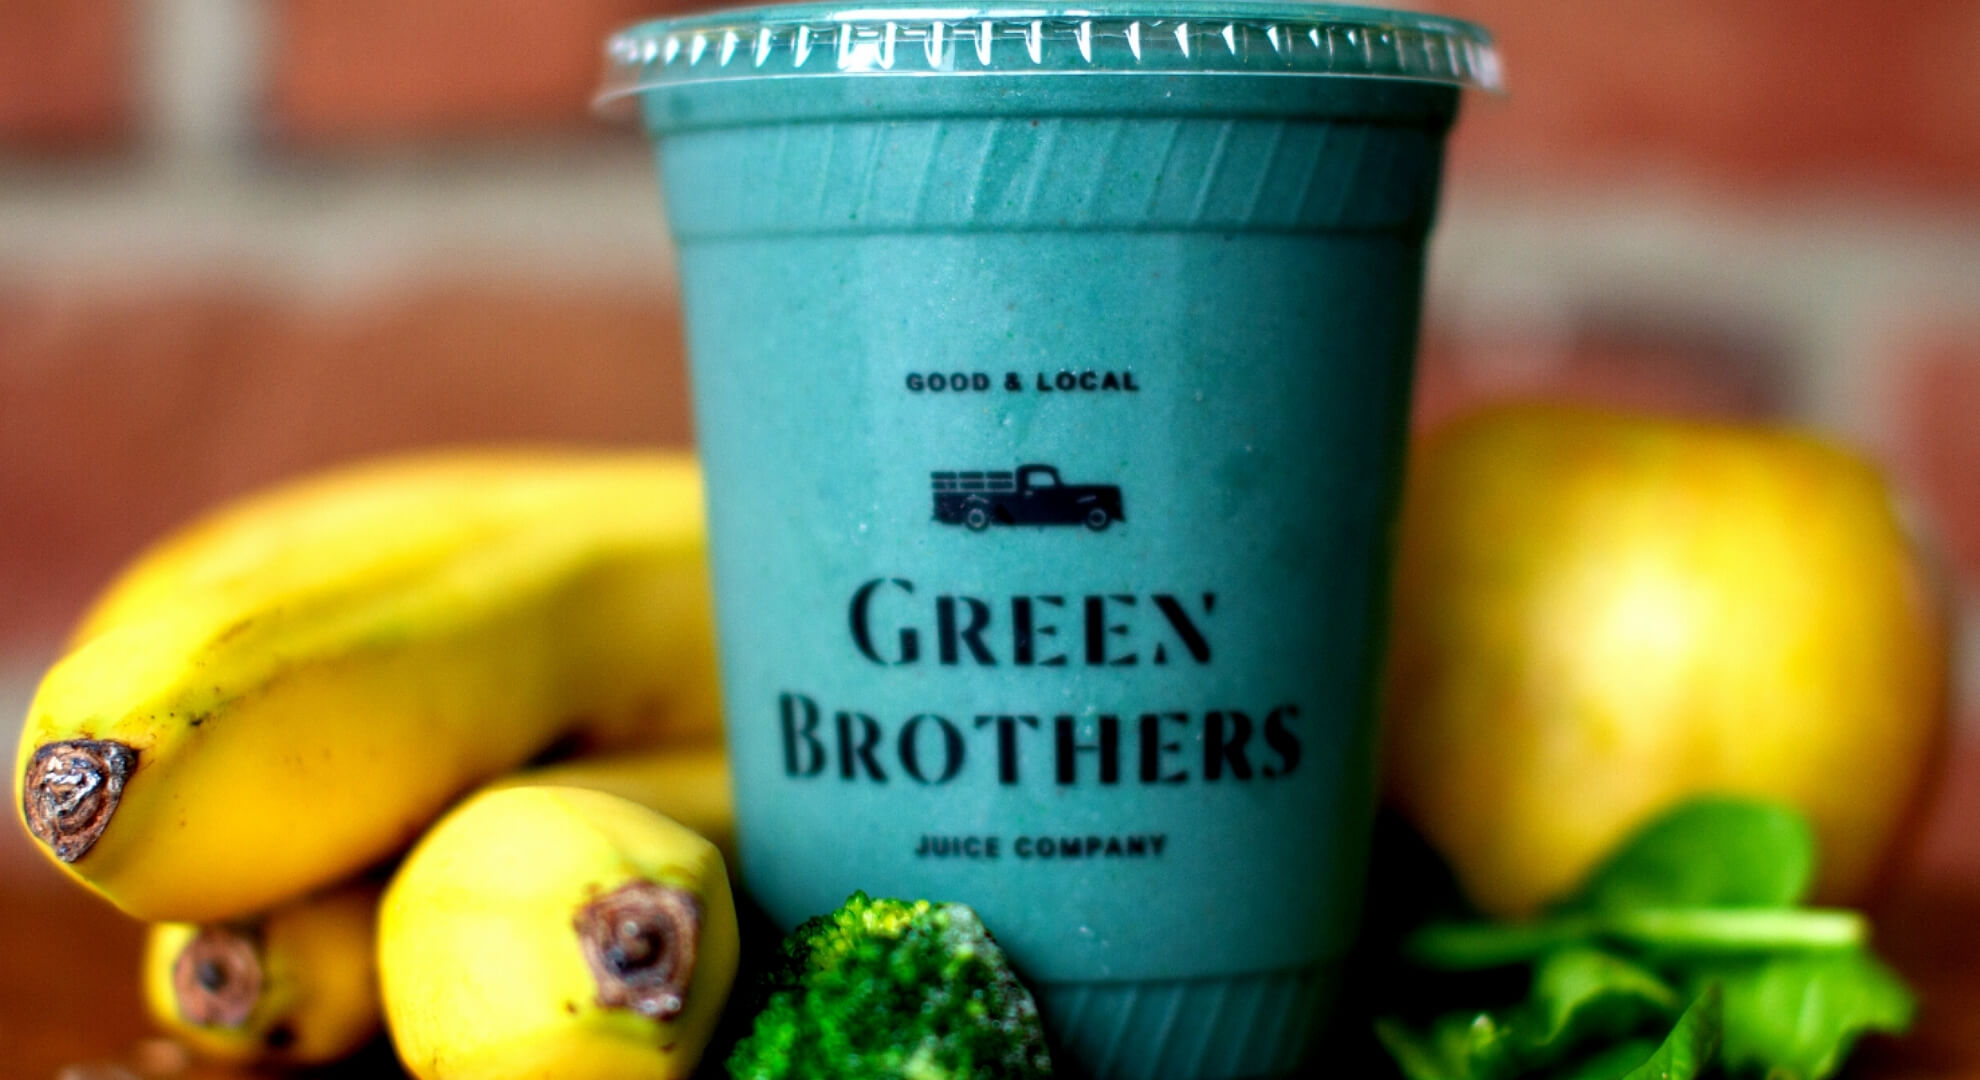 Green Brothers Juice Co at Birkdale Village